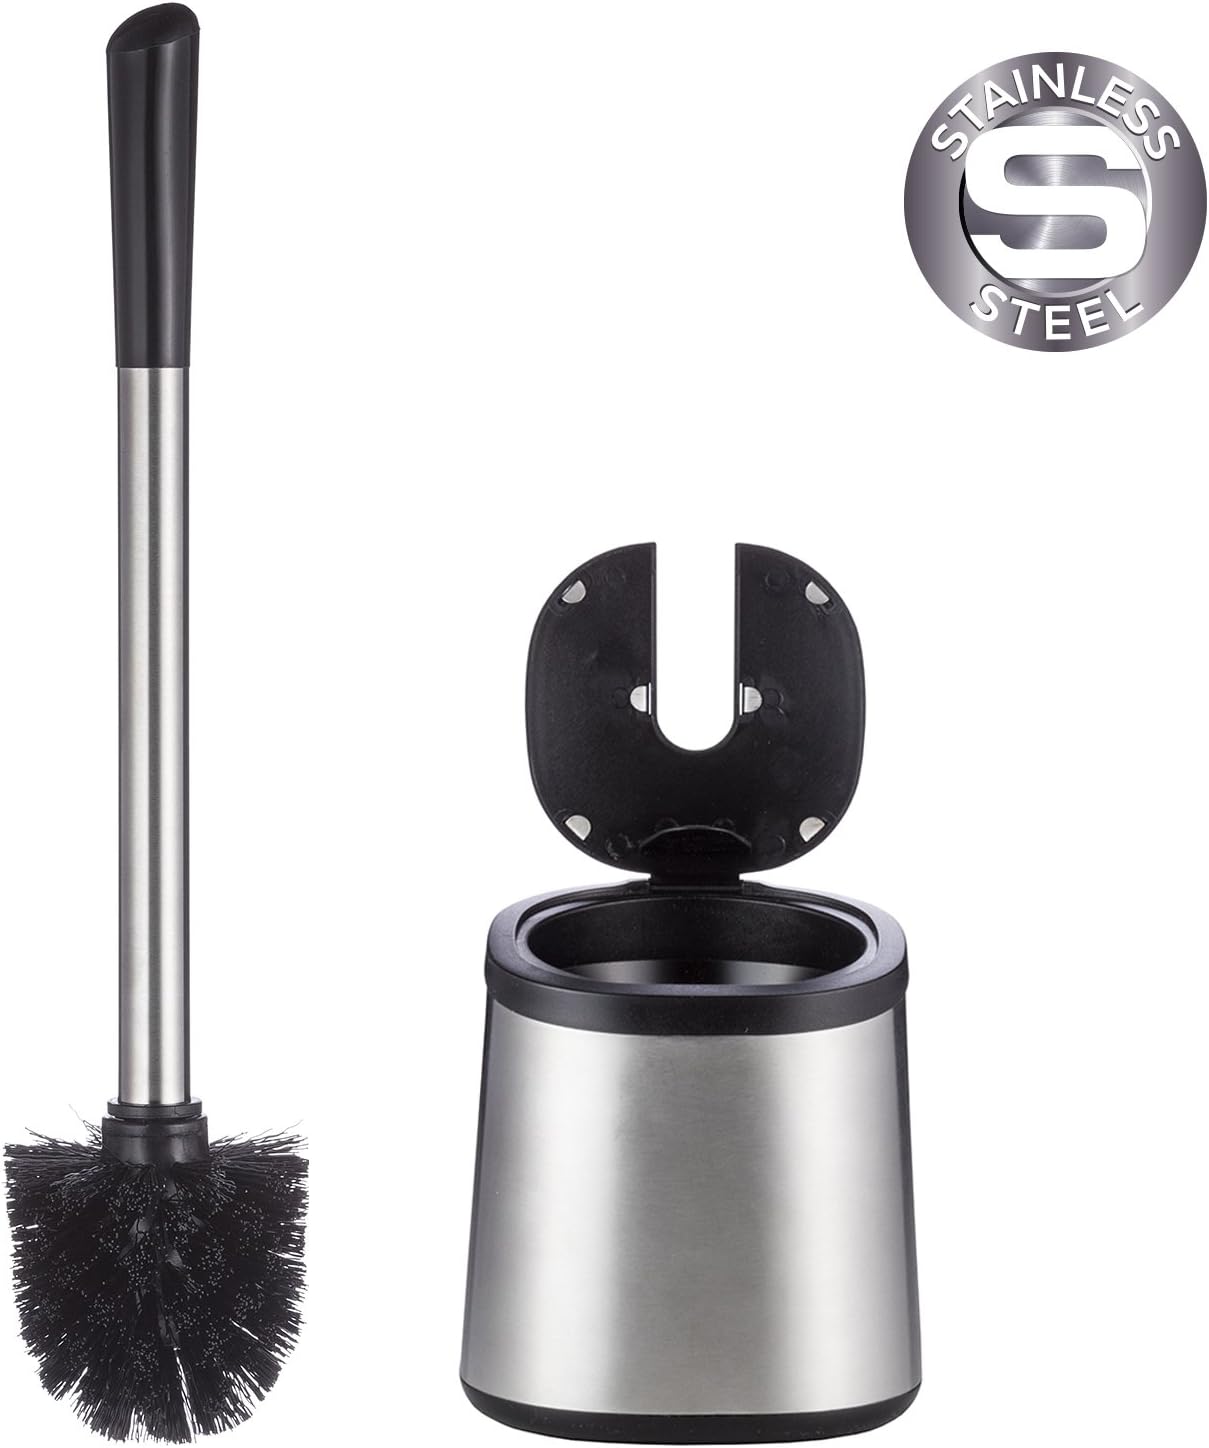 Tatkraft Shy Stainless-Steel Brush, Modern Design with Automatic Closing Lid for Comfort, Rust and Corrosion Proof Premium Quality Toilet Brush, Sturdy and Flexible Brush Fibers